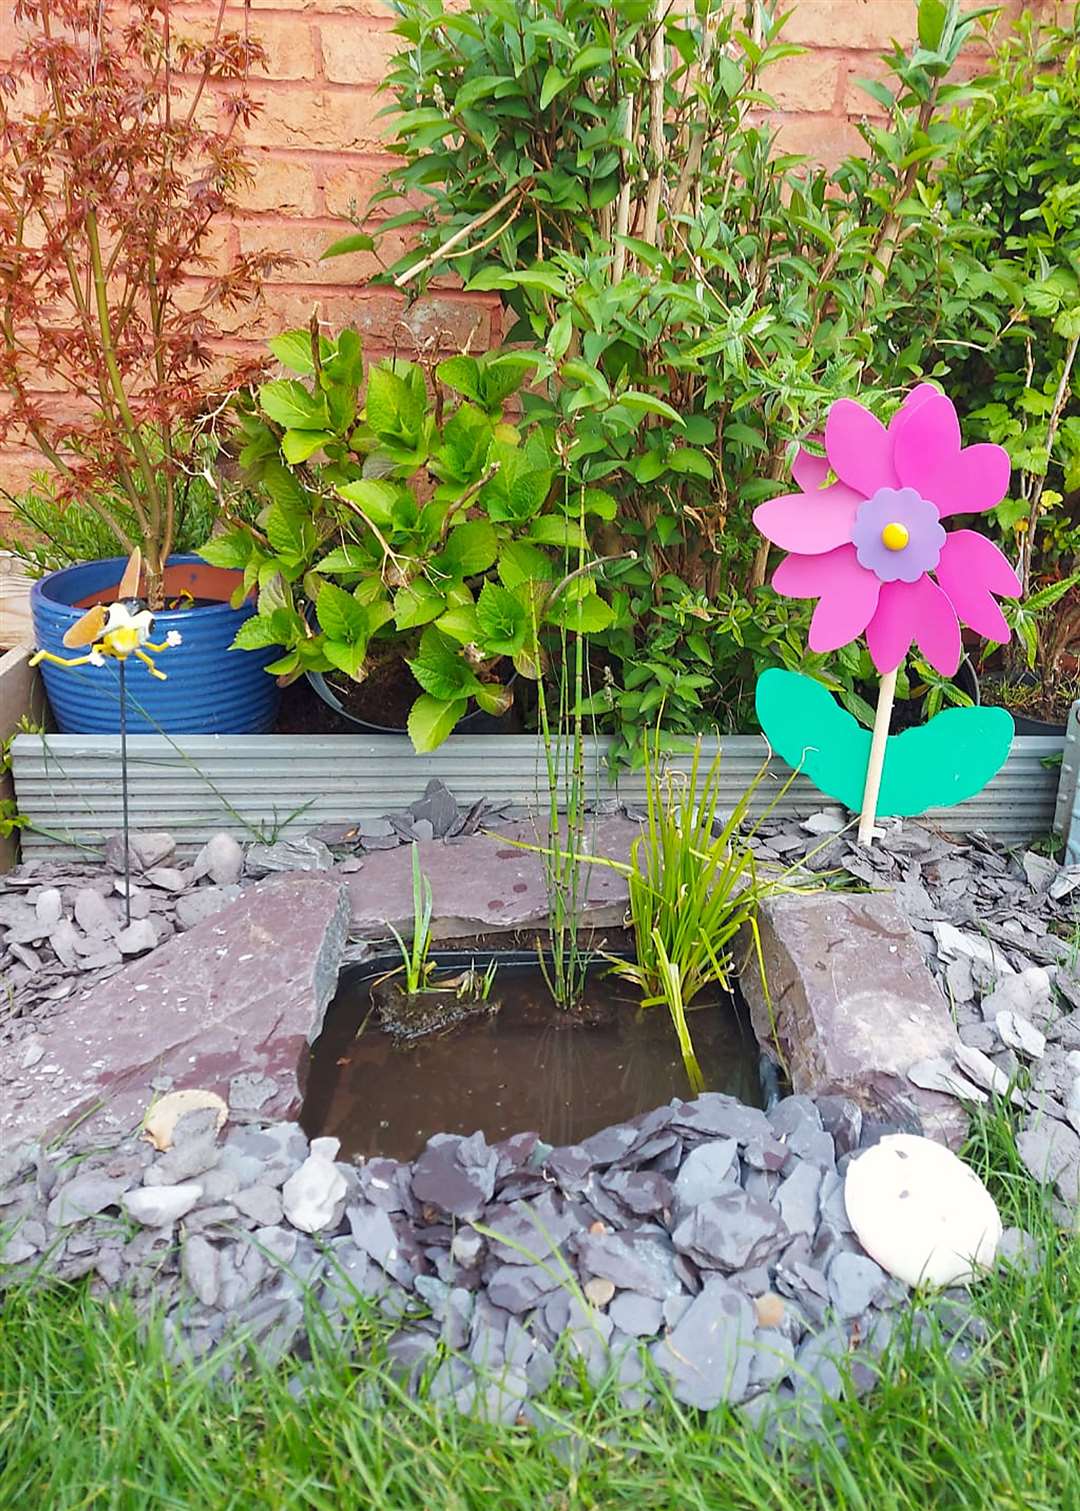 Alastair Hough's finished mini pond. Picture: Garden Organic/PA